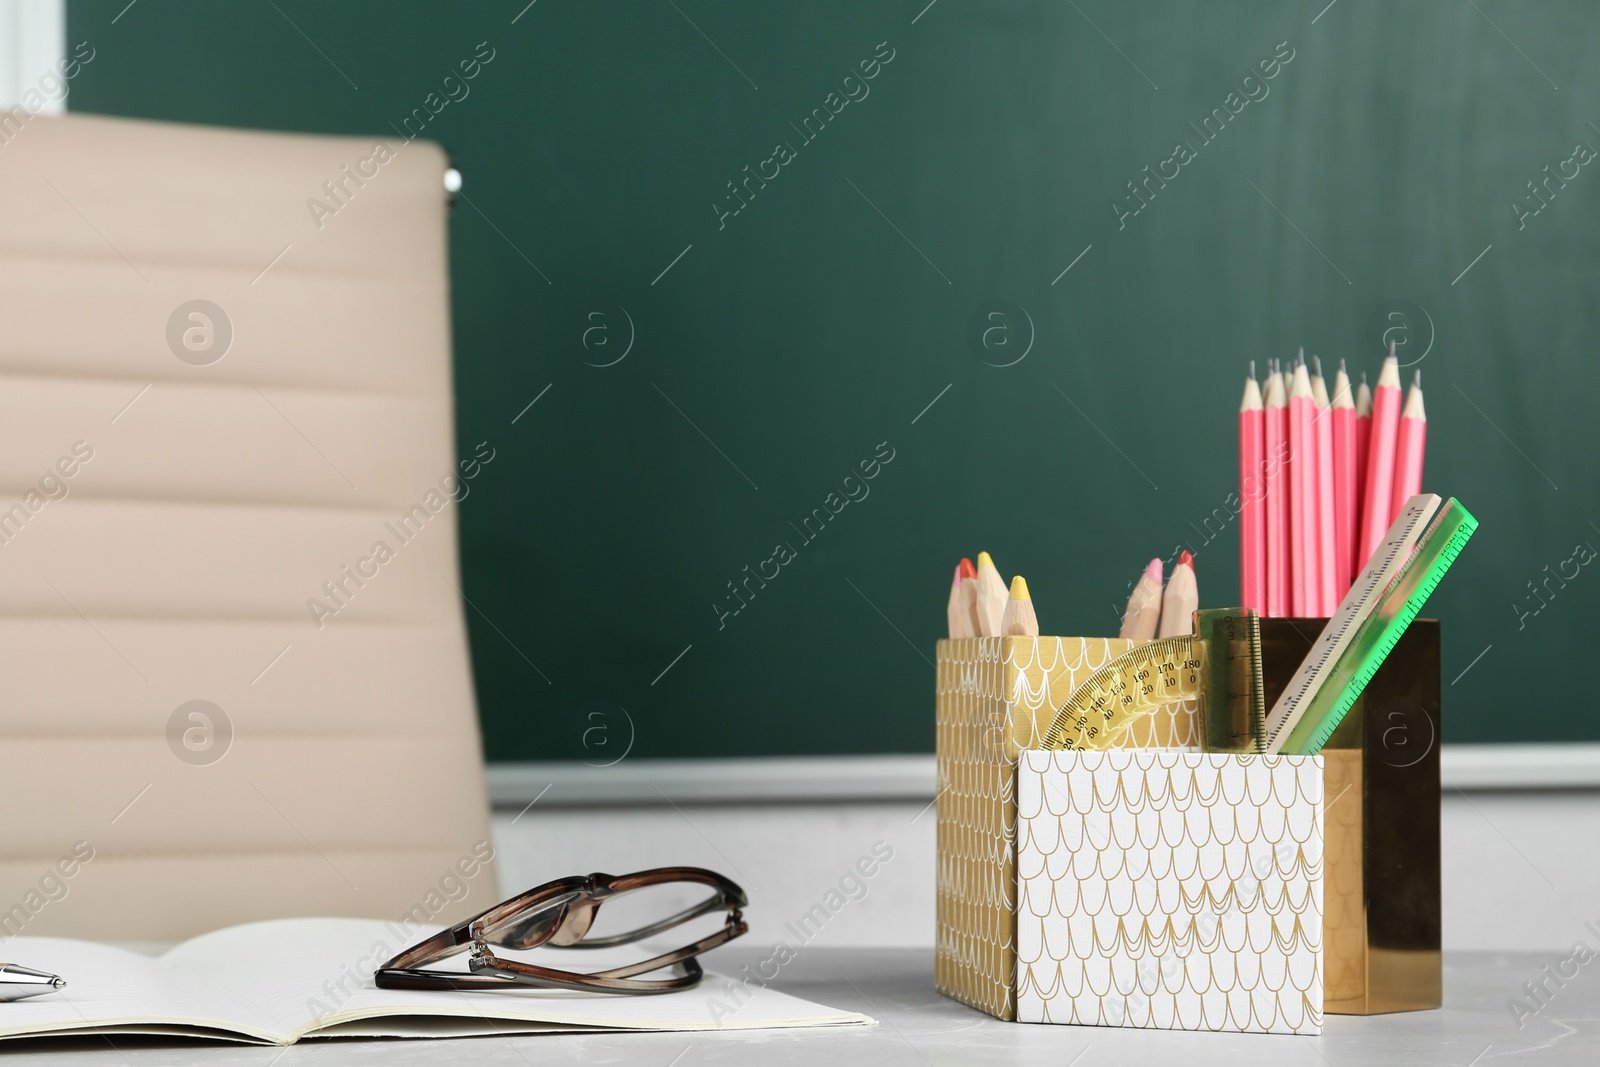 Photo of Stationery and eyeglasses on table near chalkboard in classroom. Happy teacher's day